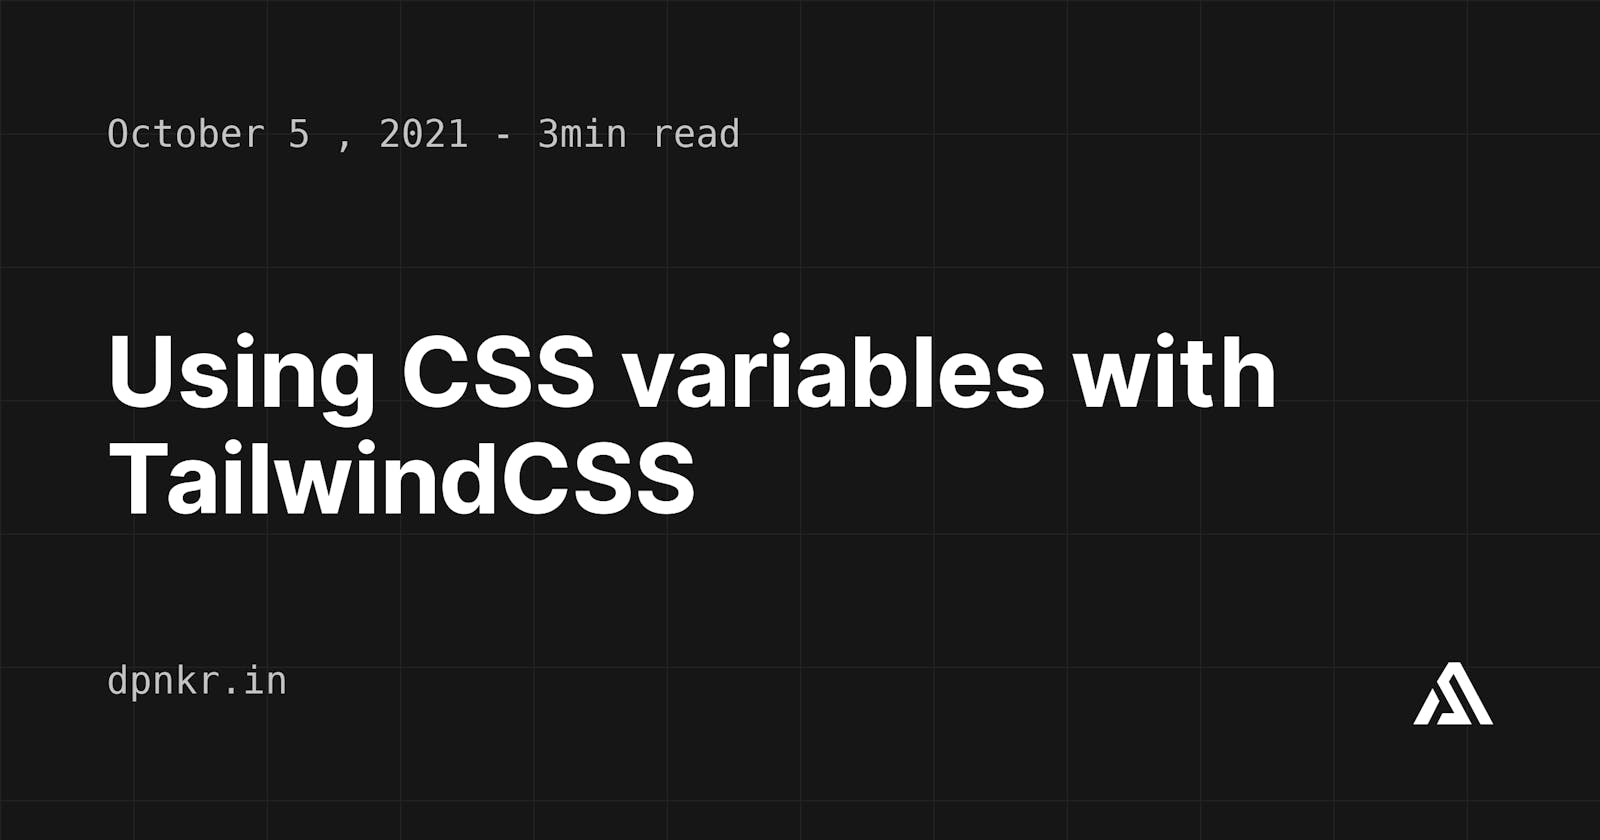 Using CSS variables with TailwindCSS